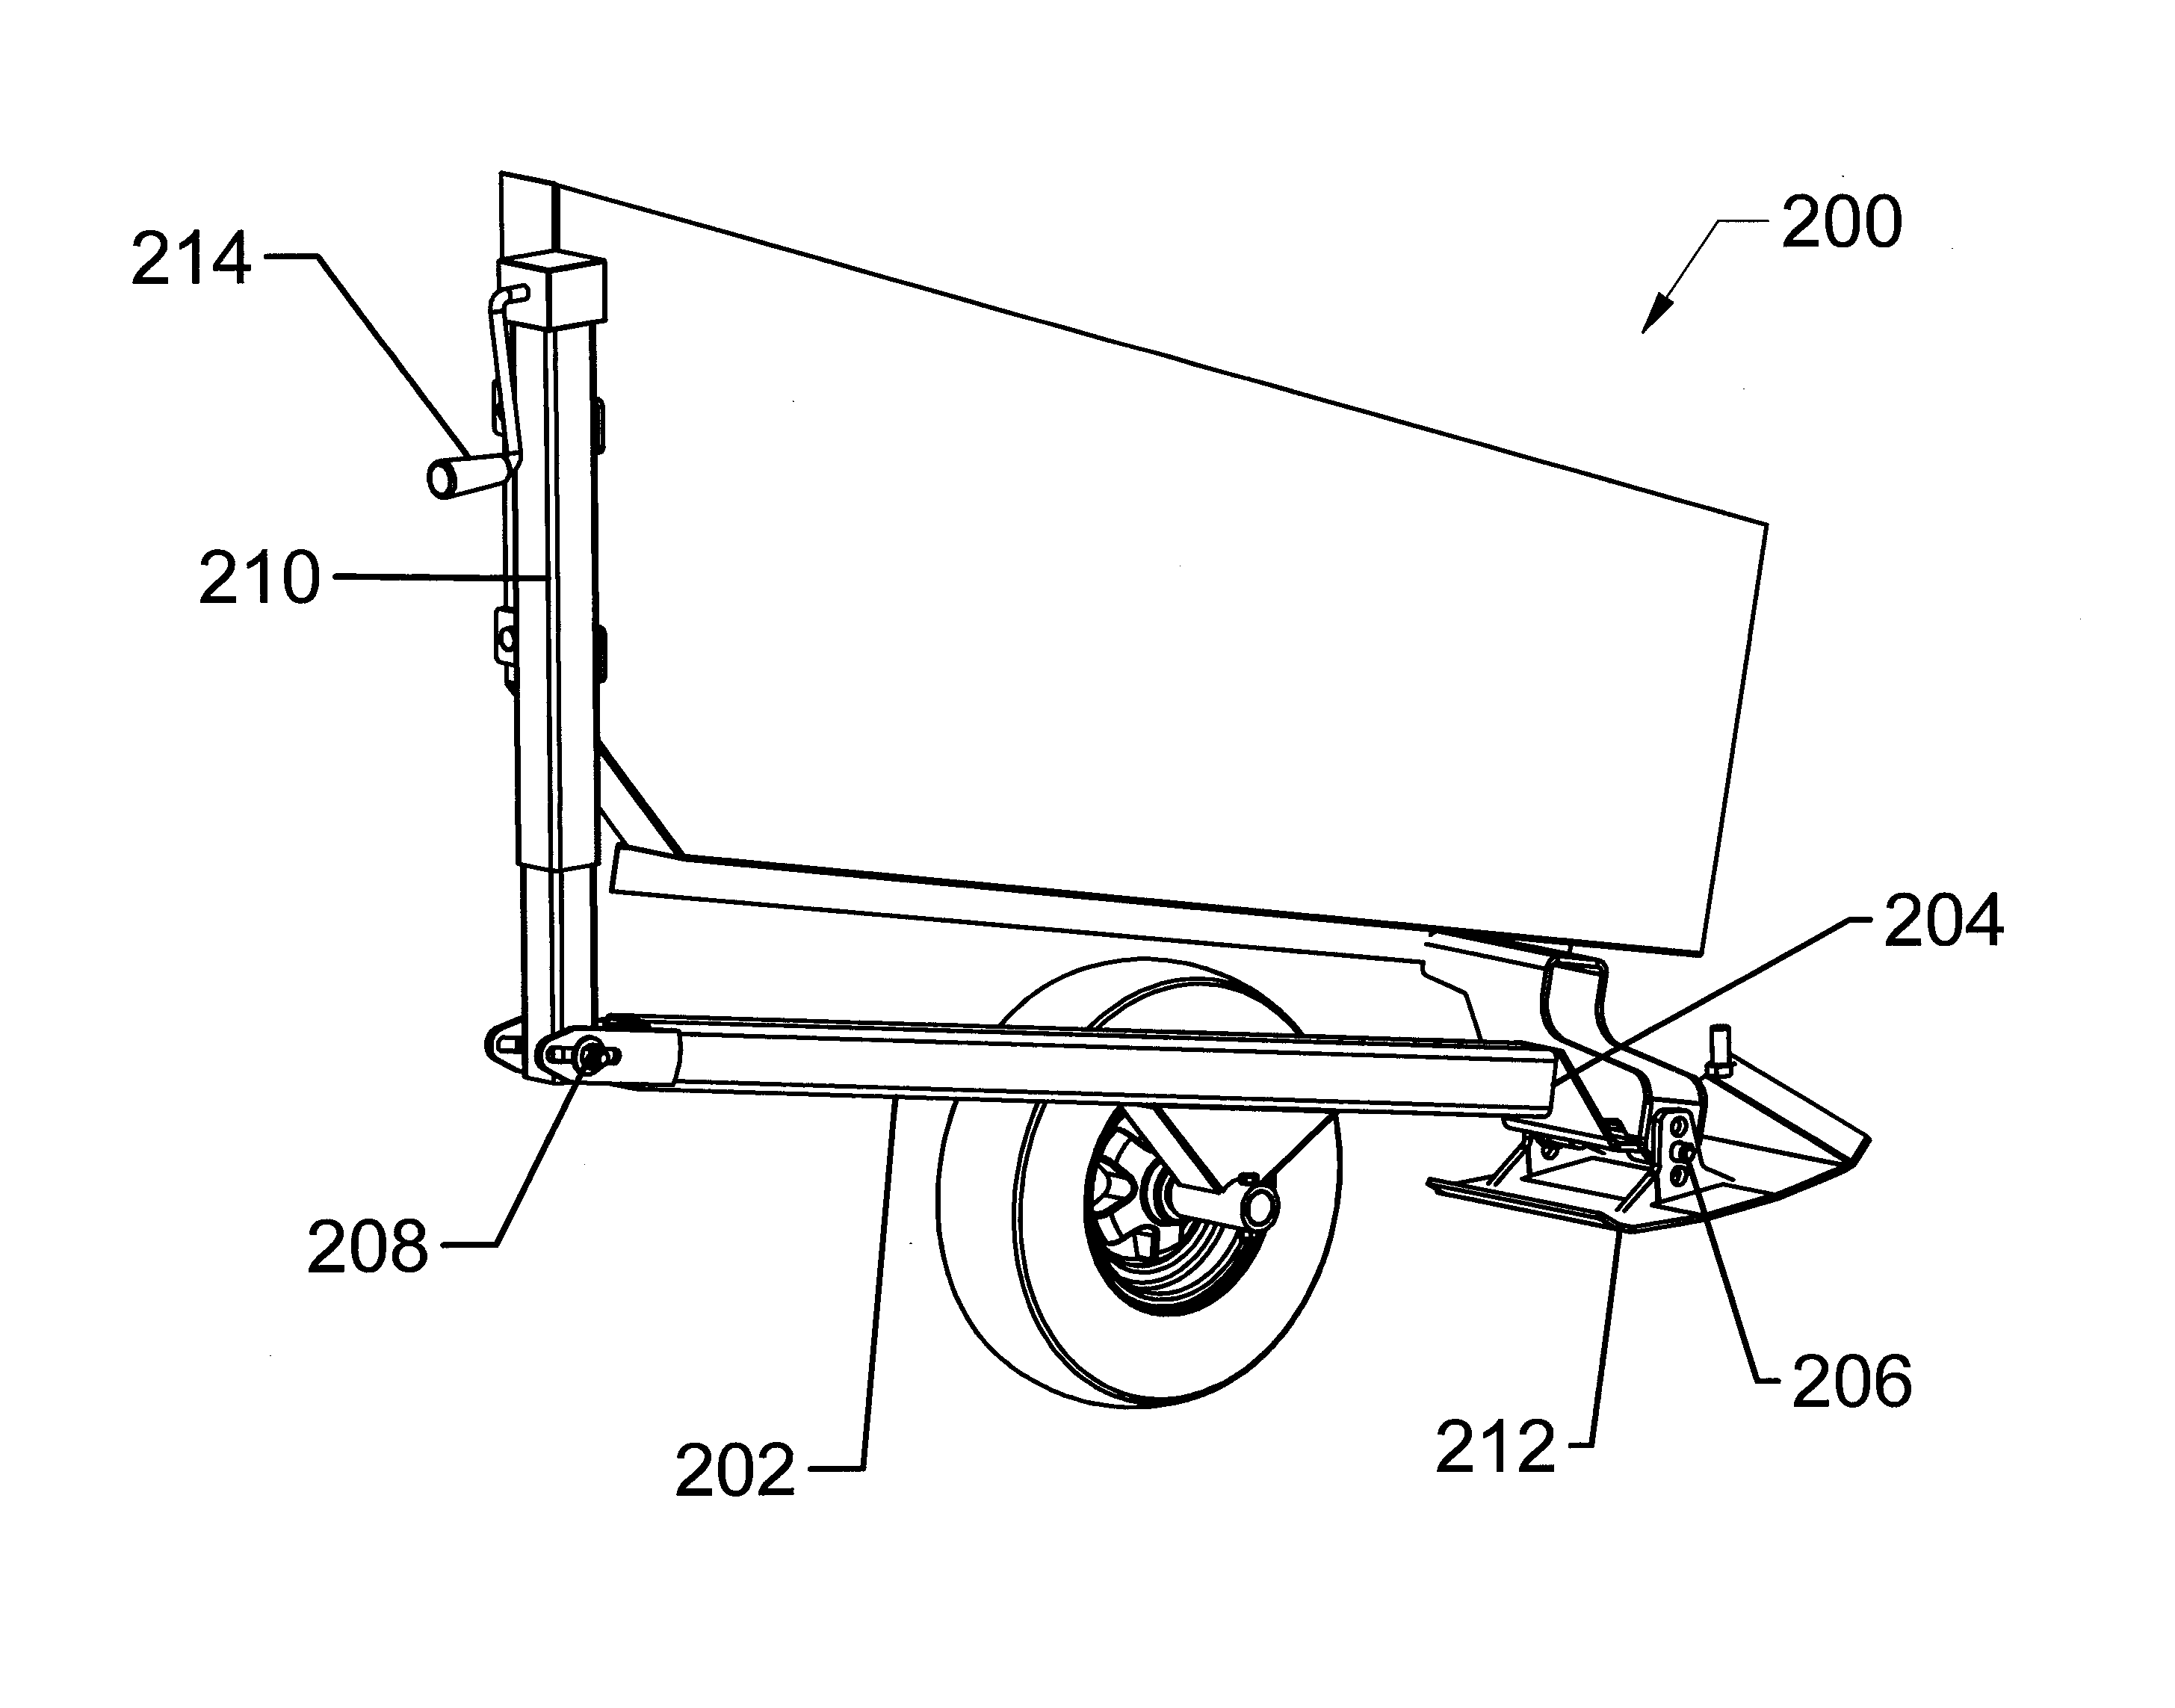 Gauge Wheels for a Multi-Section Agricultural Header